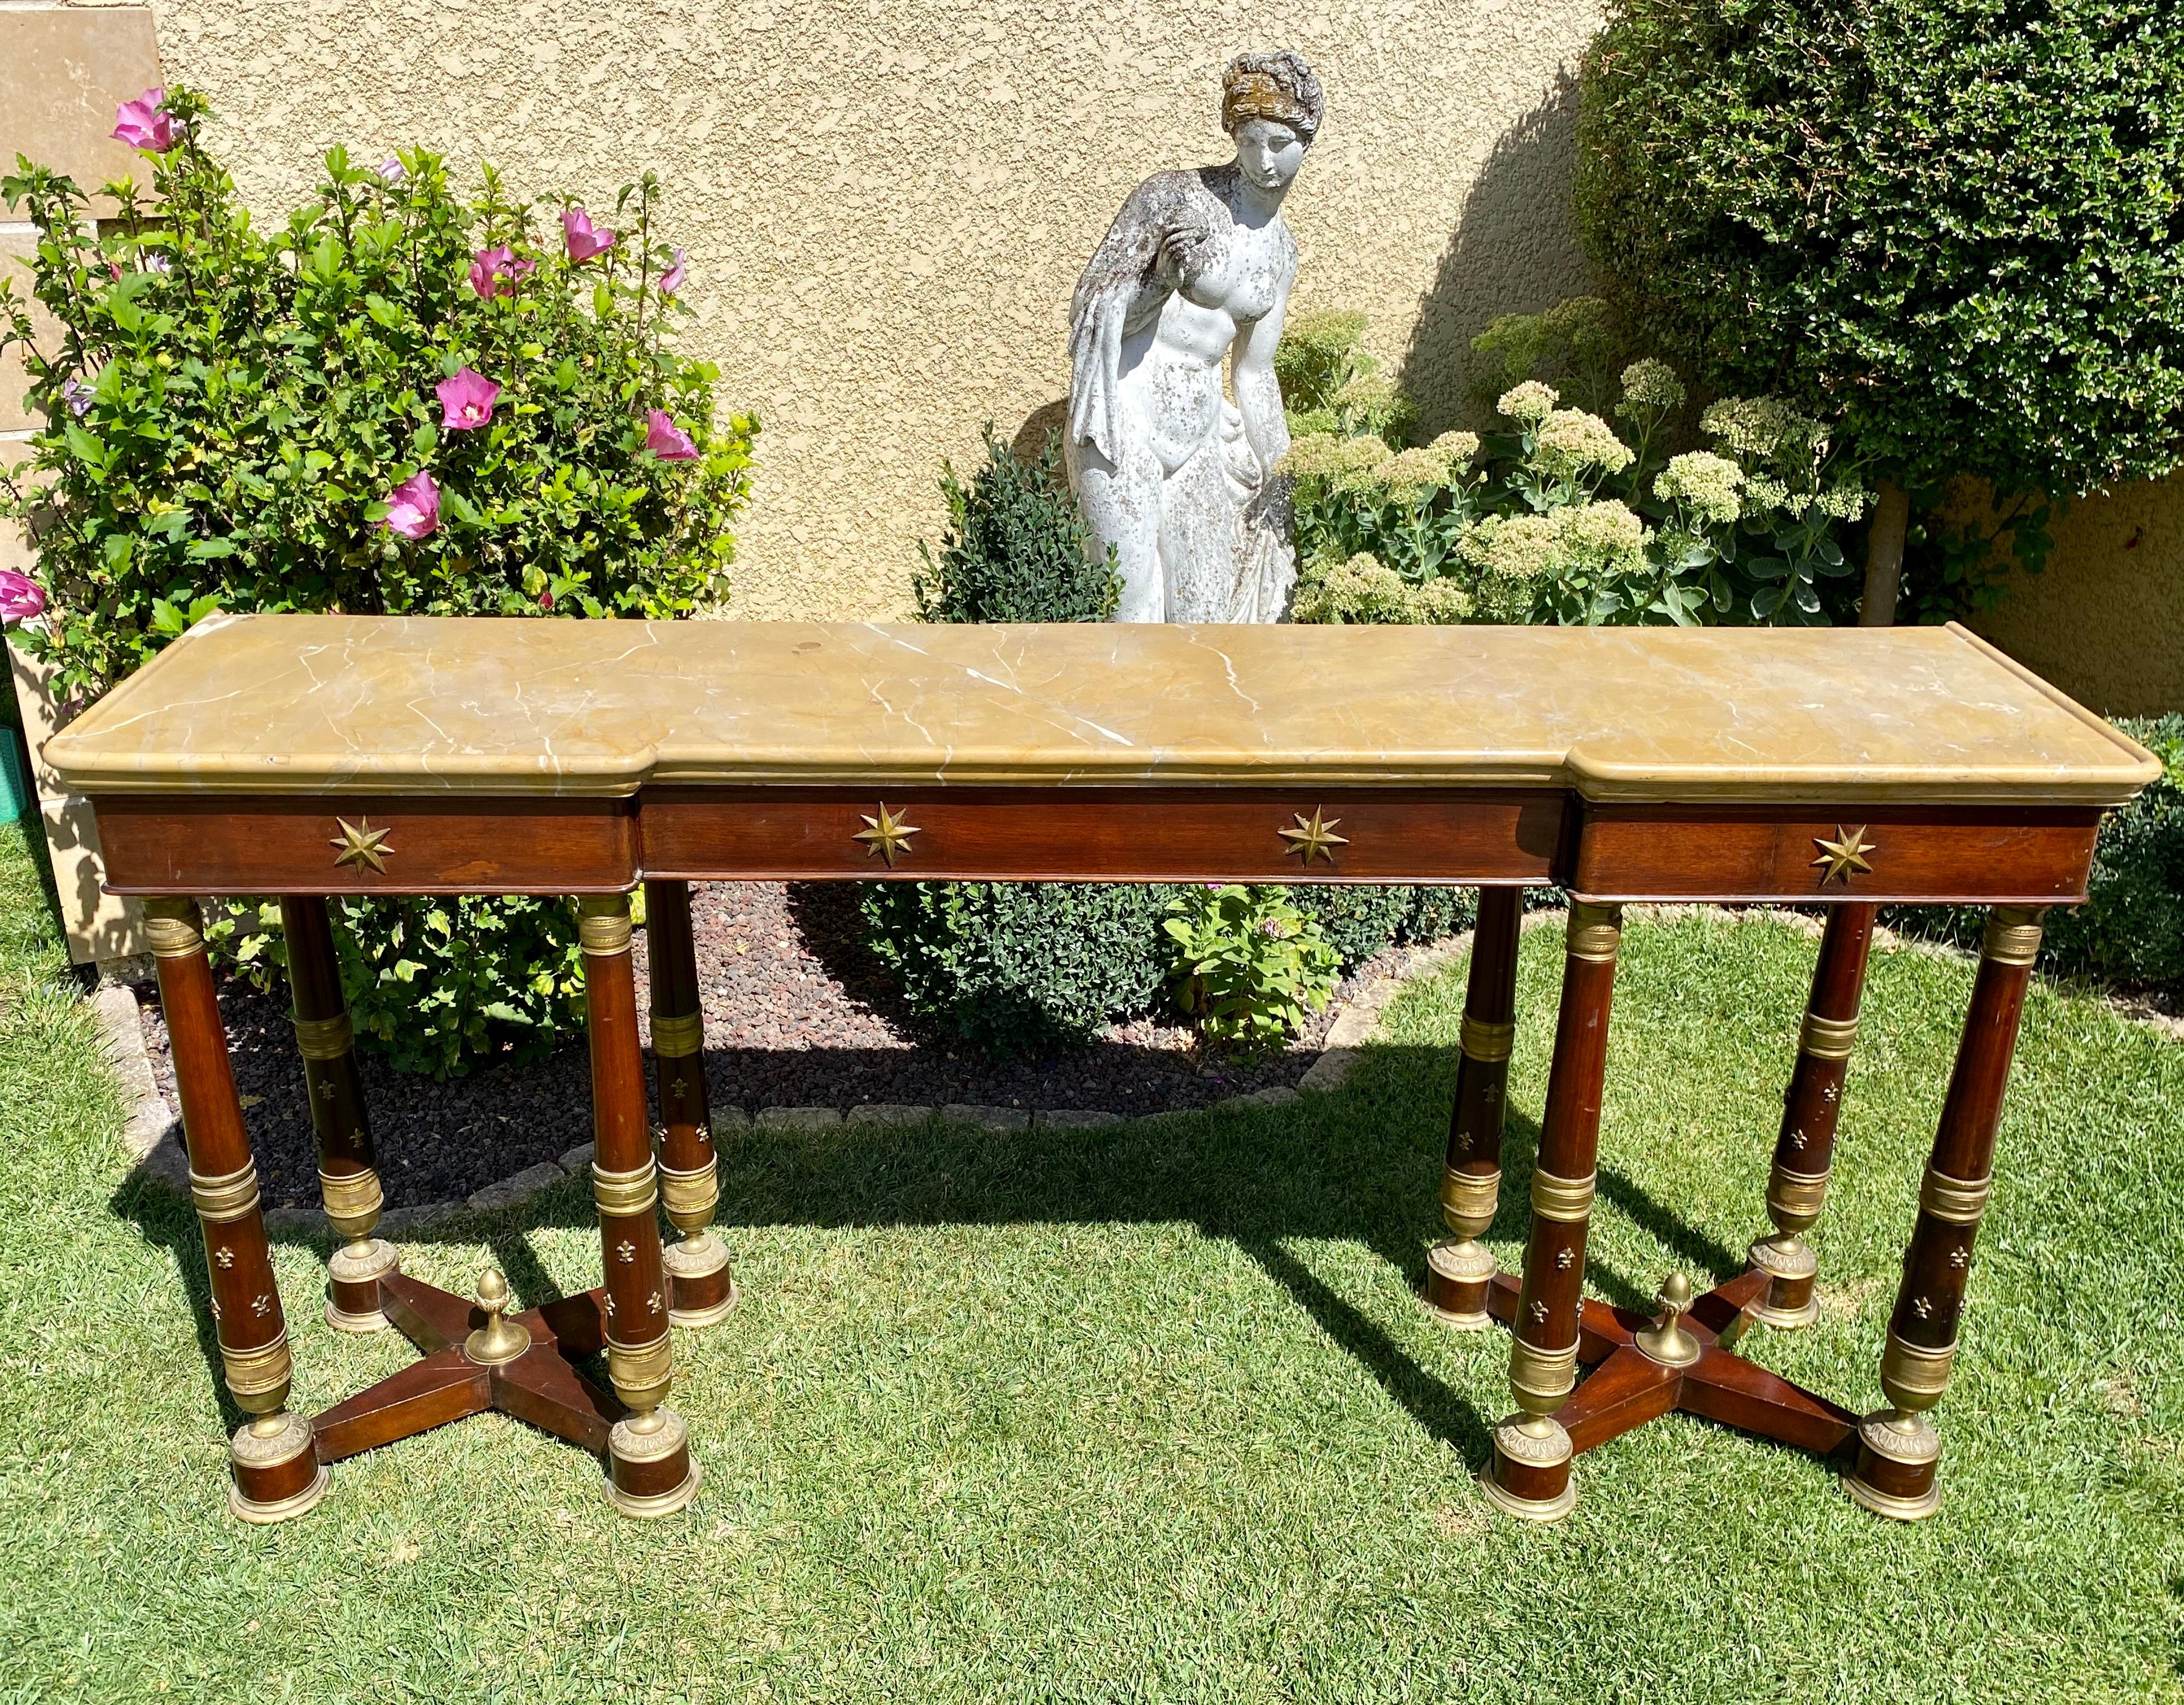 Rare and superb Empire style mahogany console table decorated with gilded bronzes. It is topped with an original Siena marble in good condition. This console is large in size which is unusual and has three drawers on the front. 
French work of the